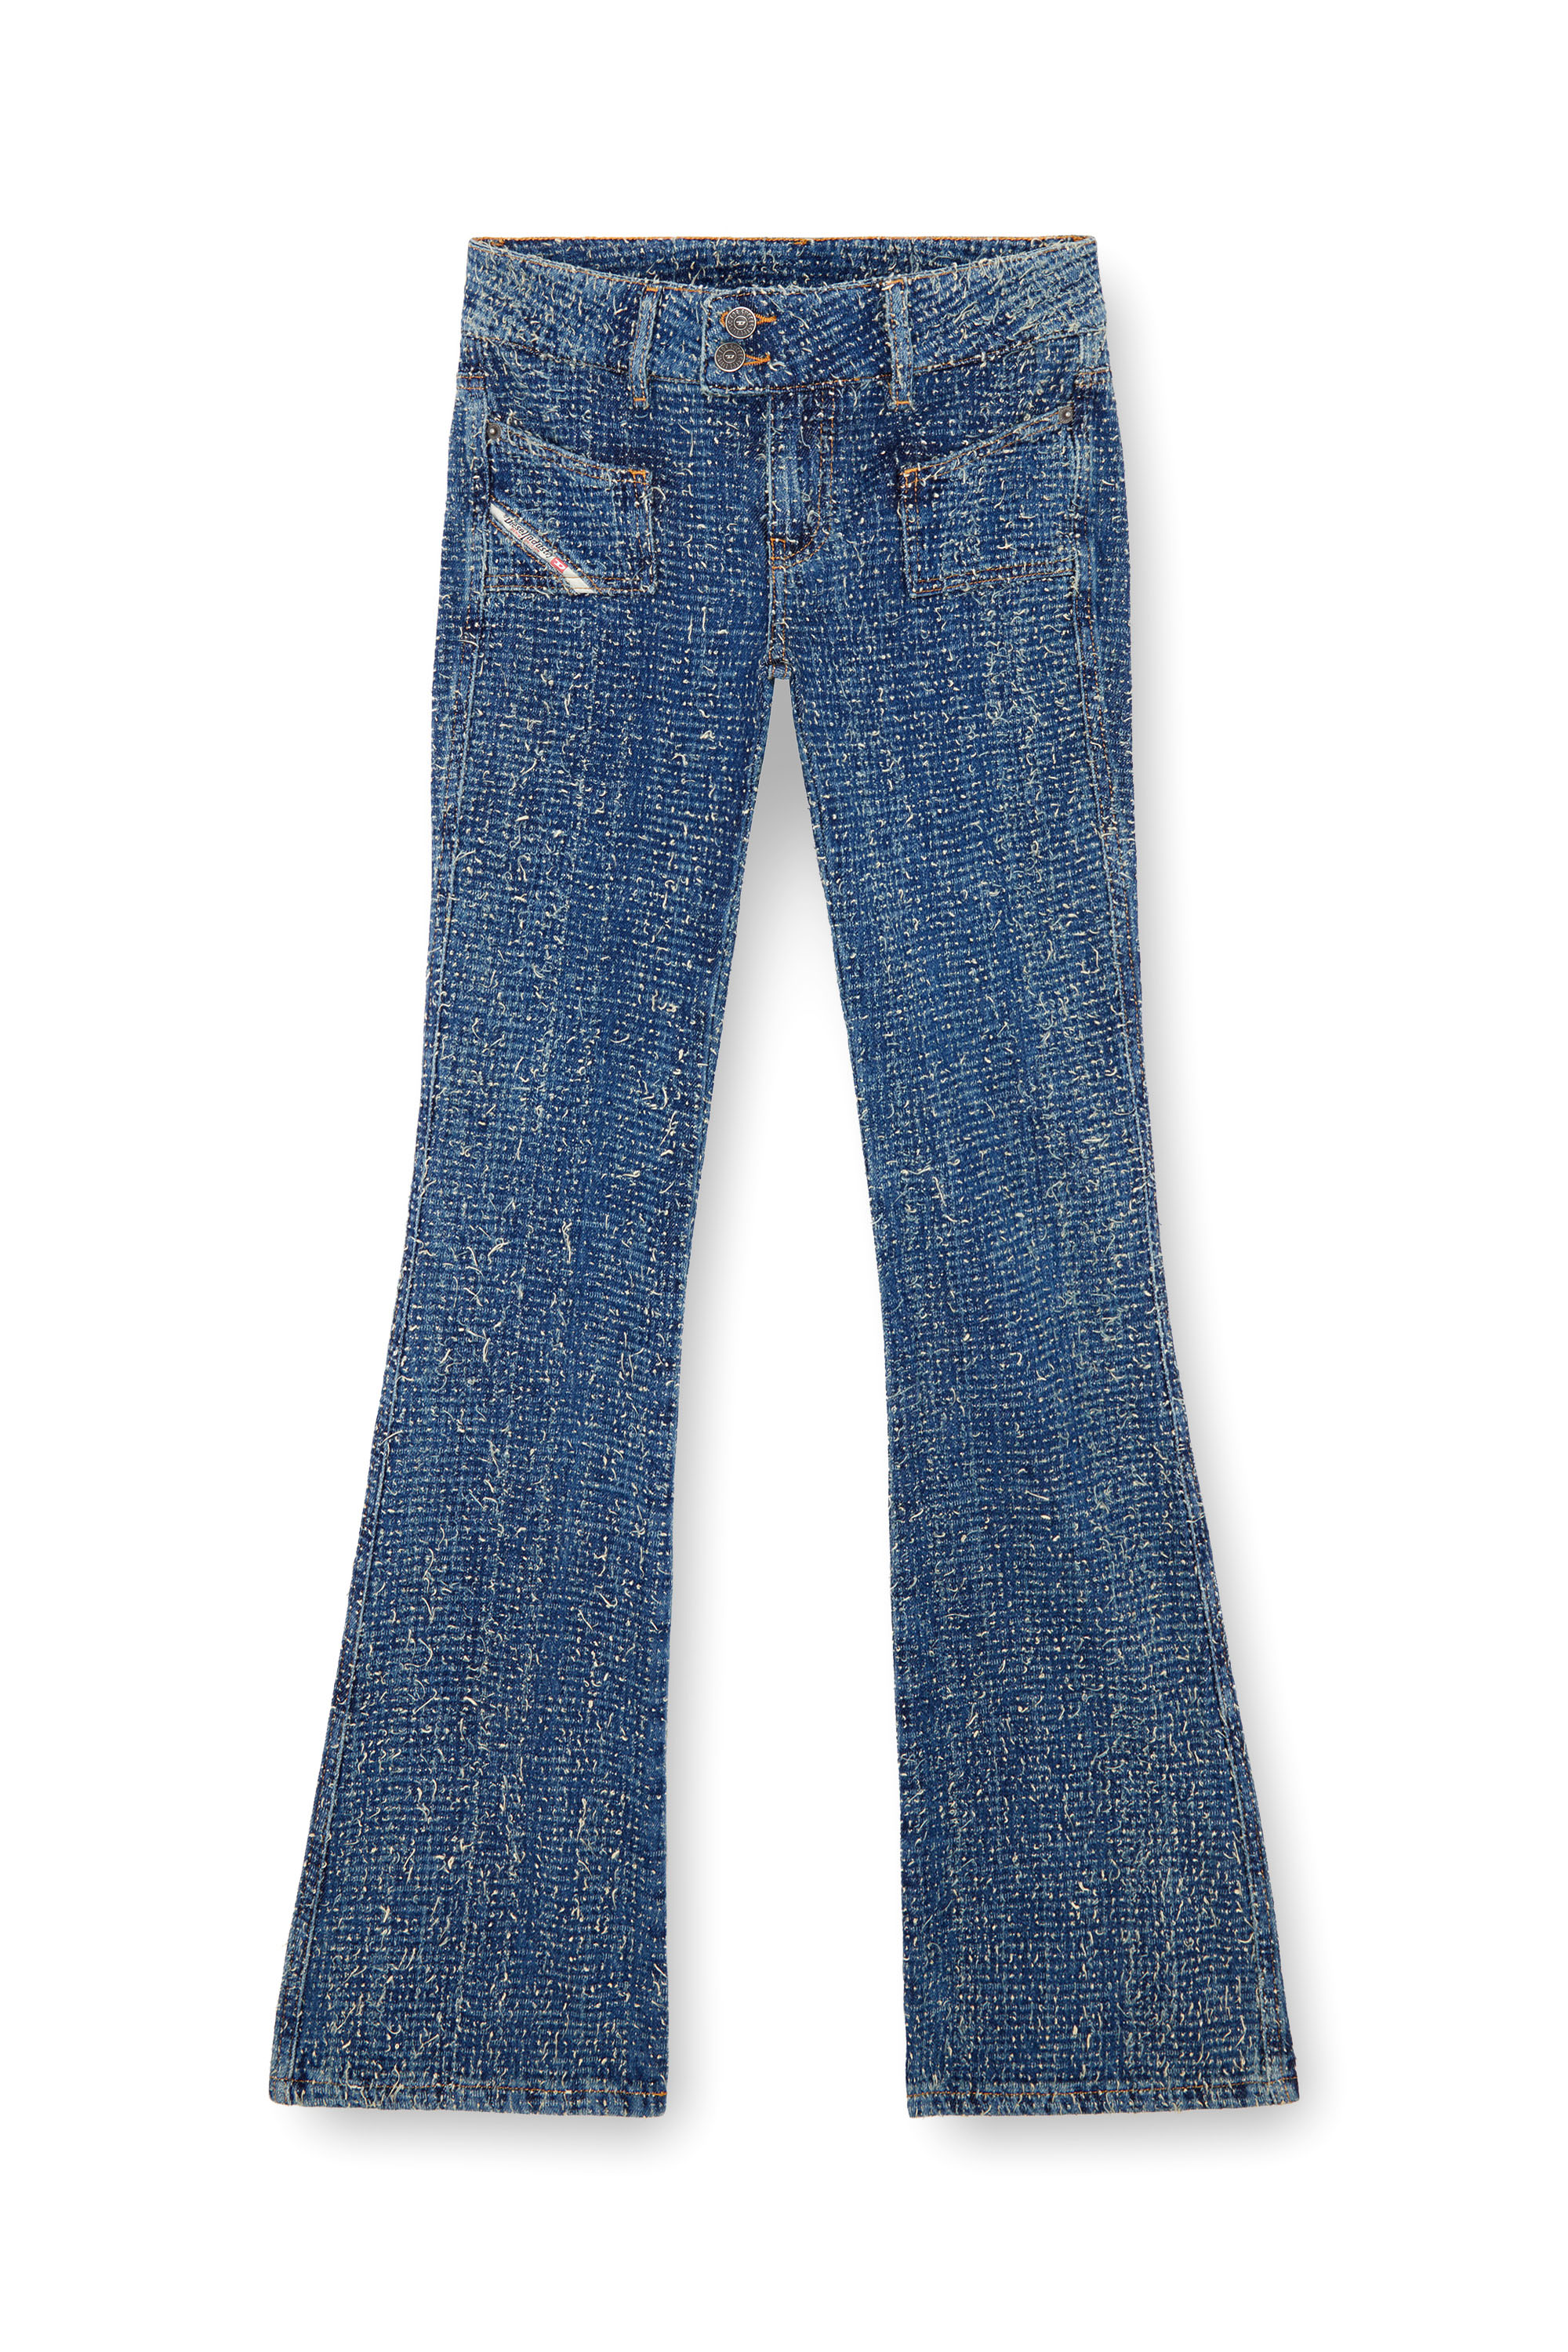 Diesel - Bootcut and Flare Jeans D-Ebush 0PGAH, Mujer Bootcut y Flare Jeans - D-Ebush in Azul marino - Image 5